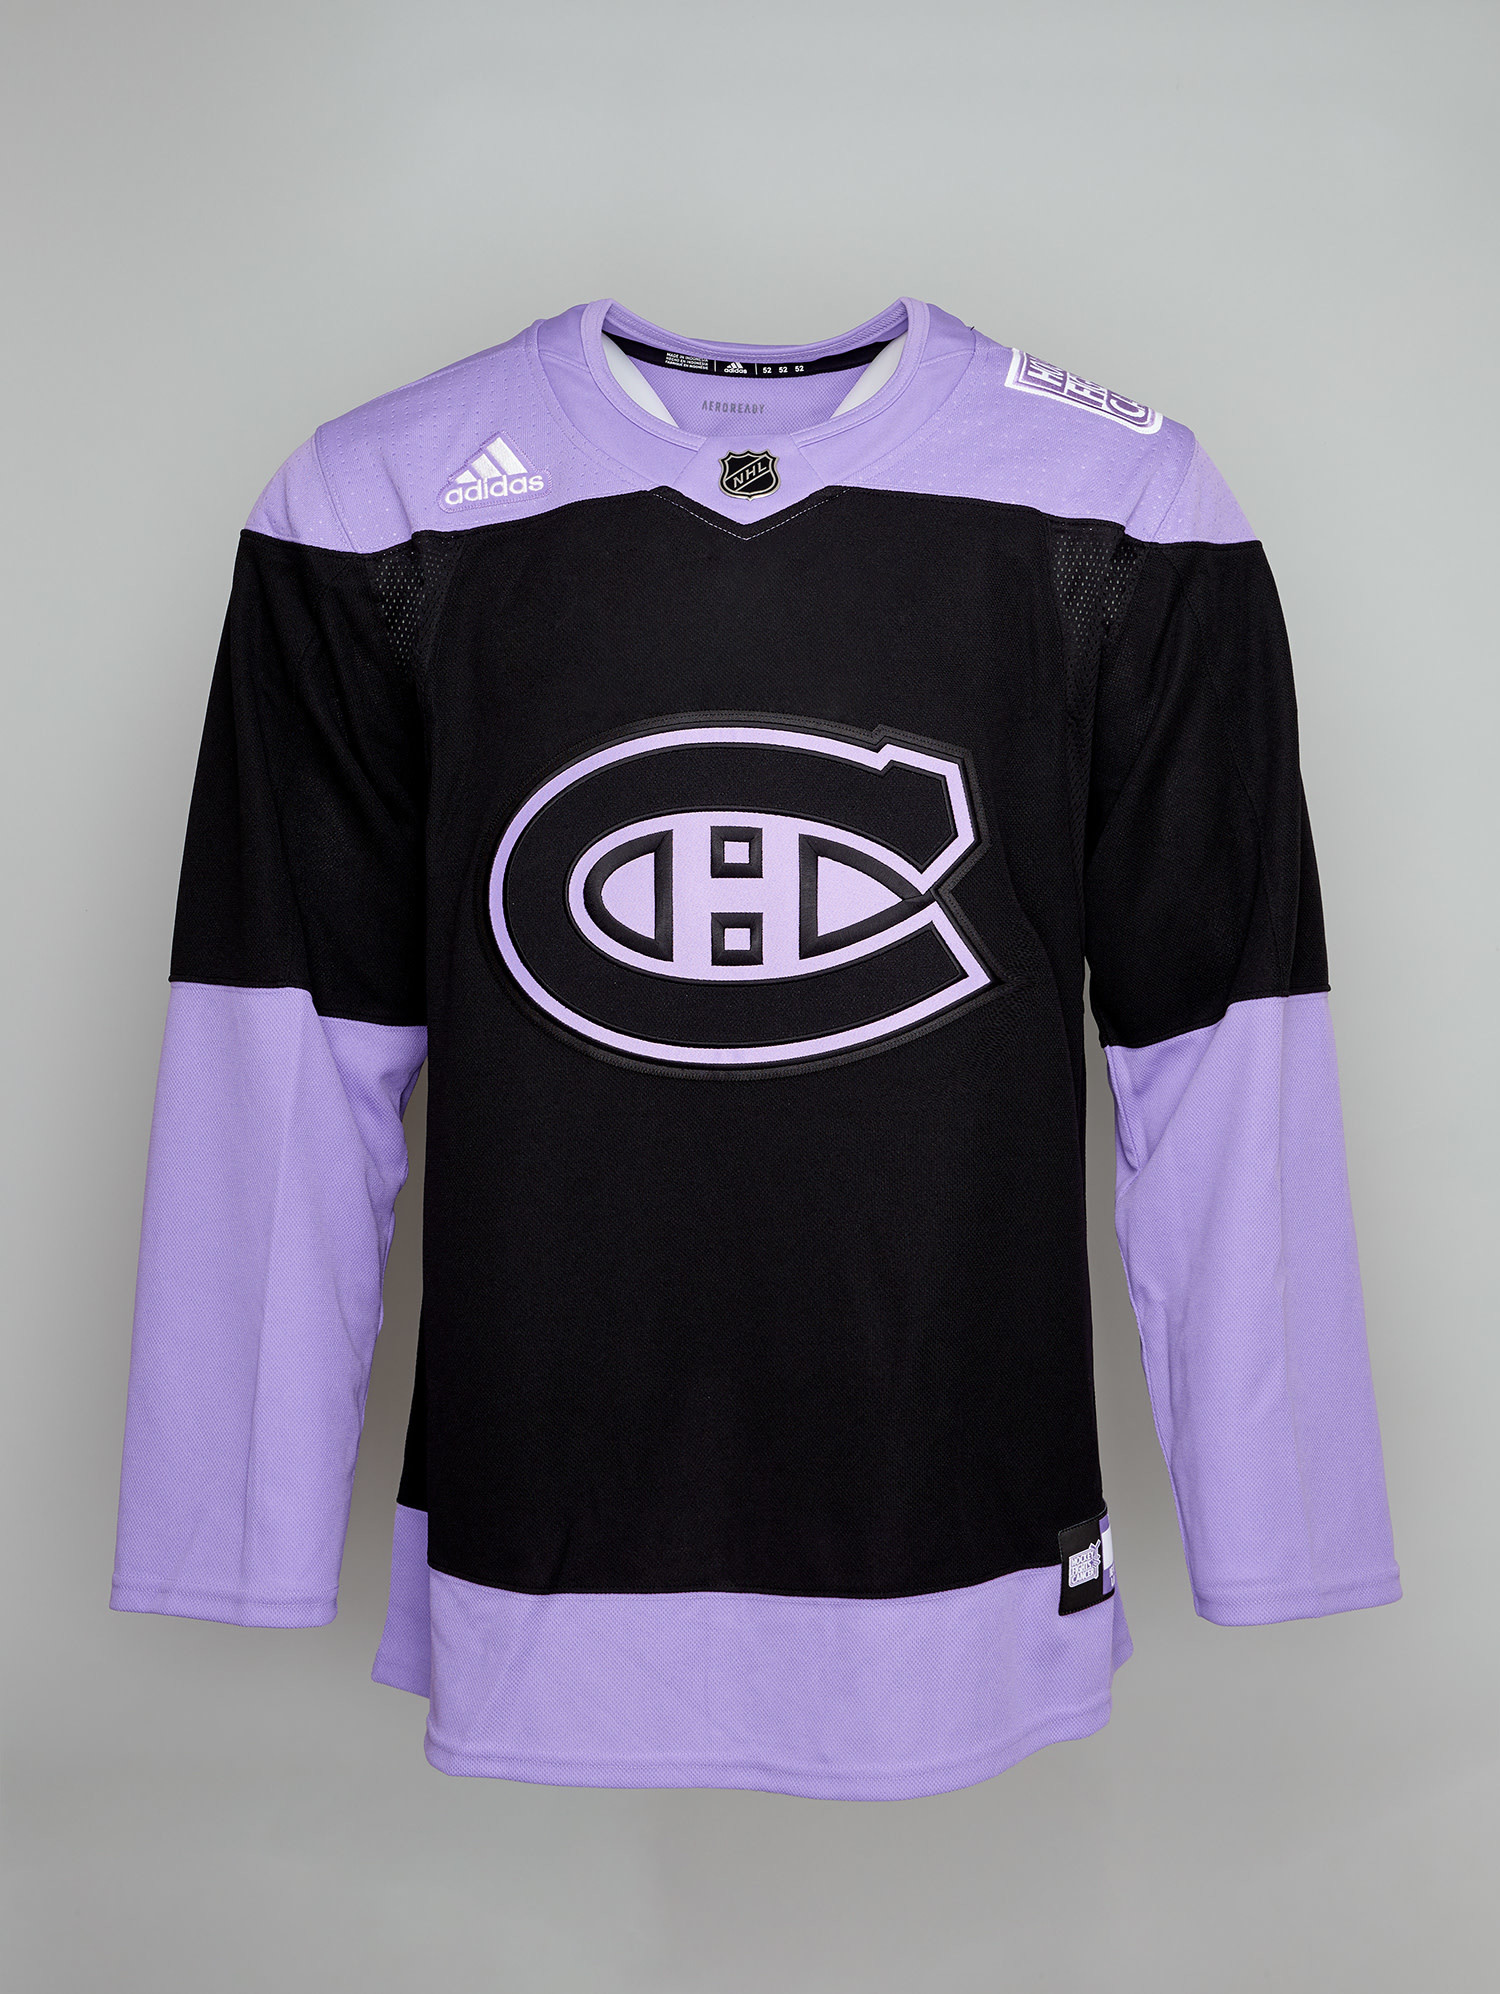 bruins hockey fights cancer jersey